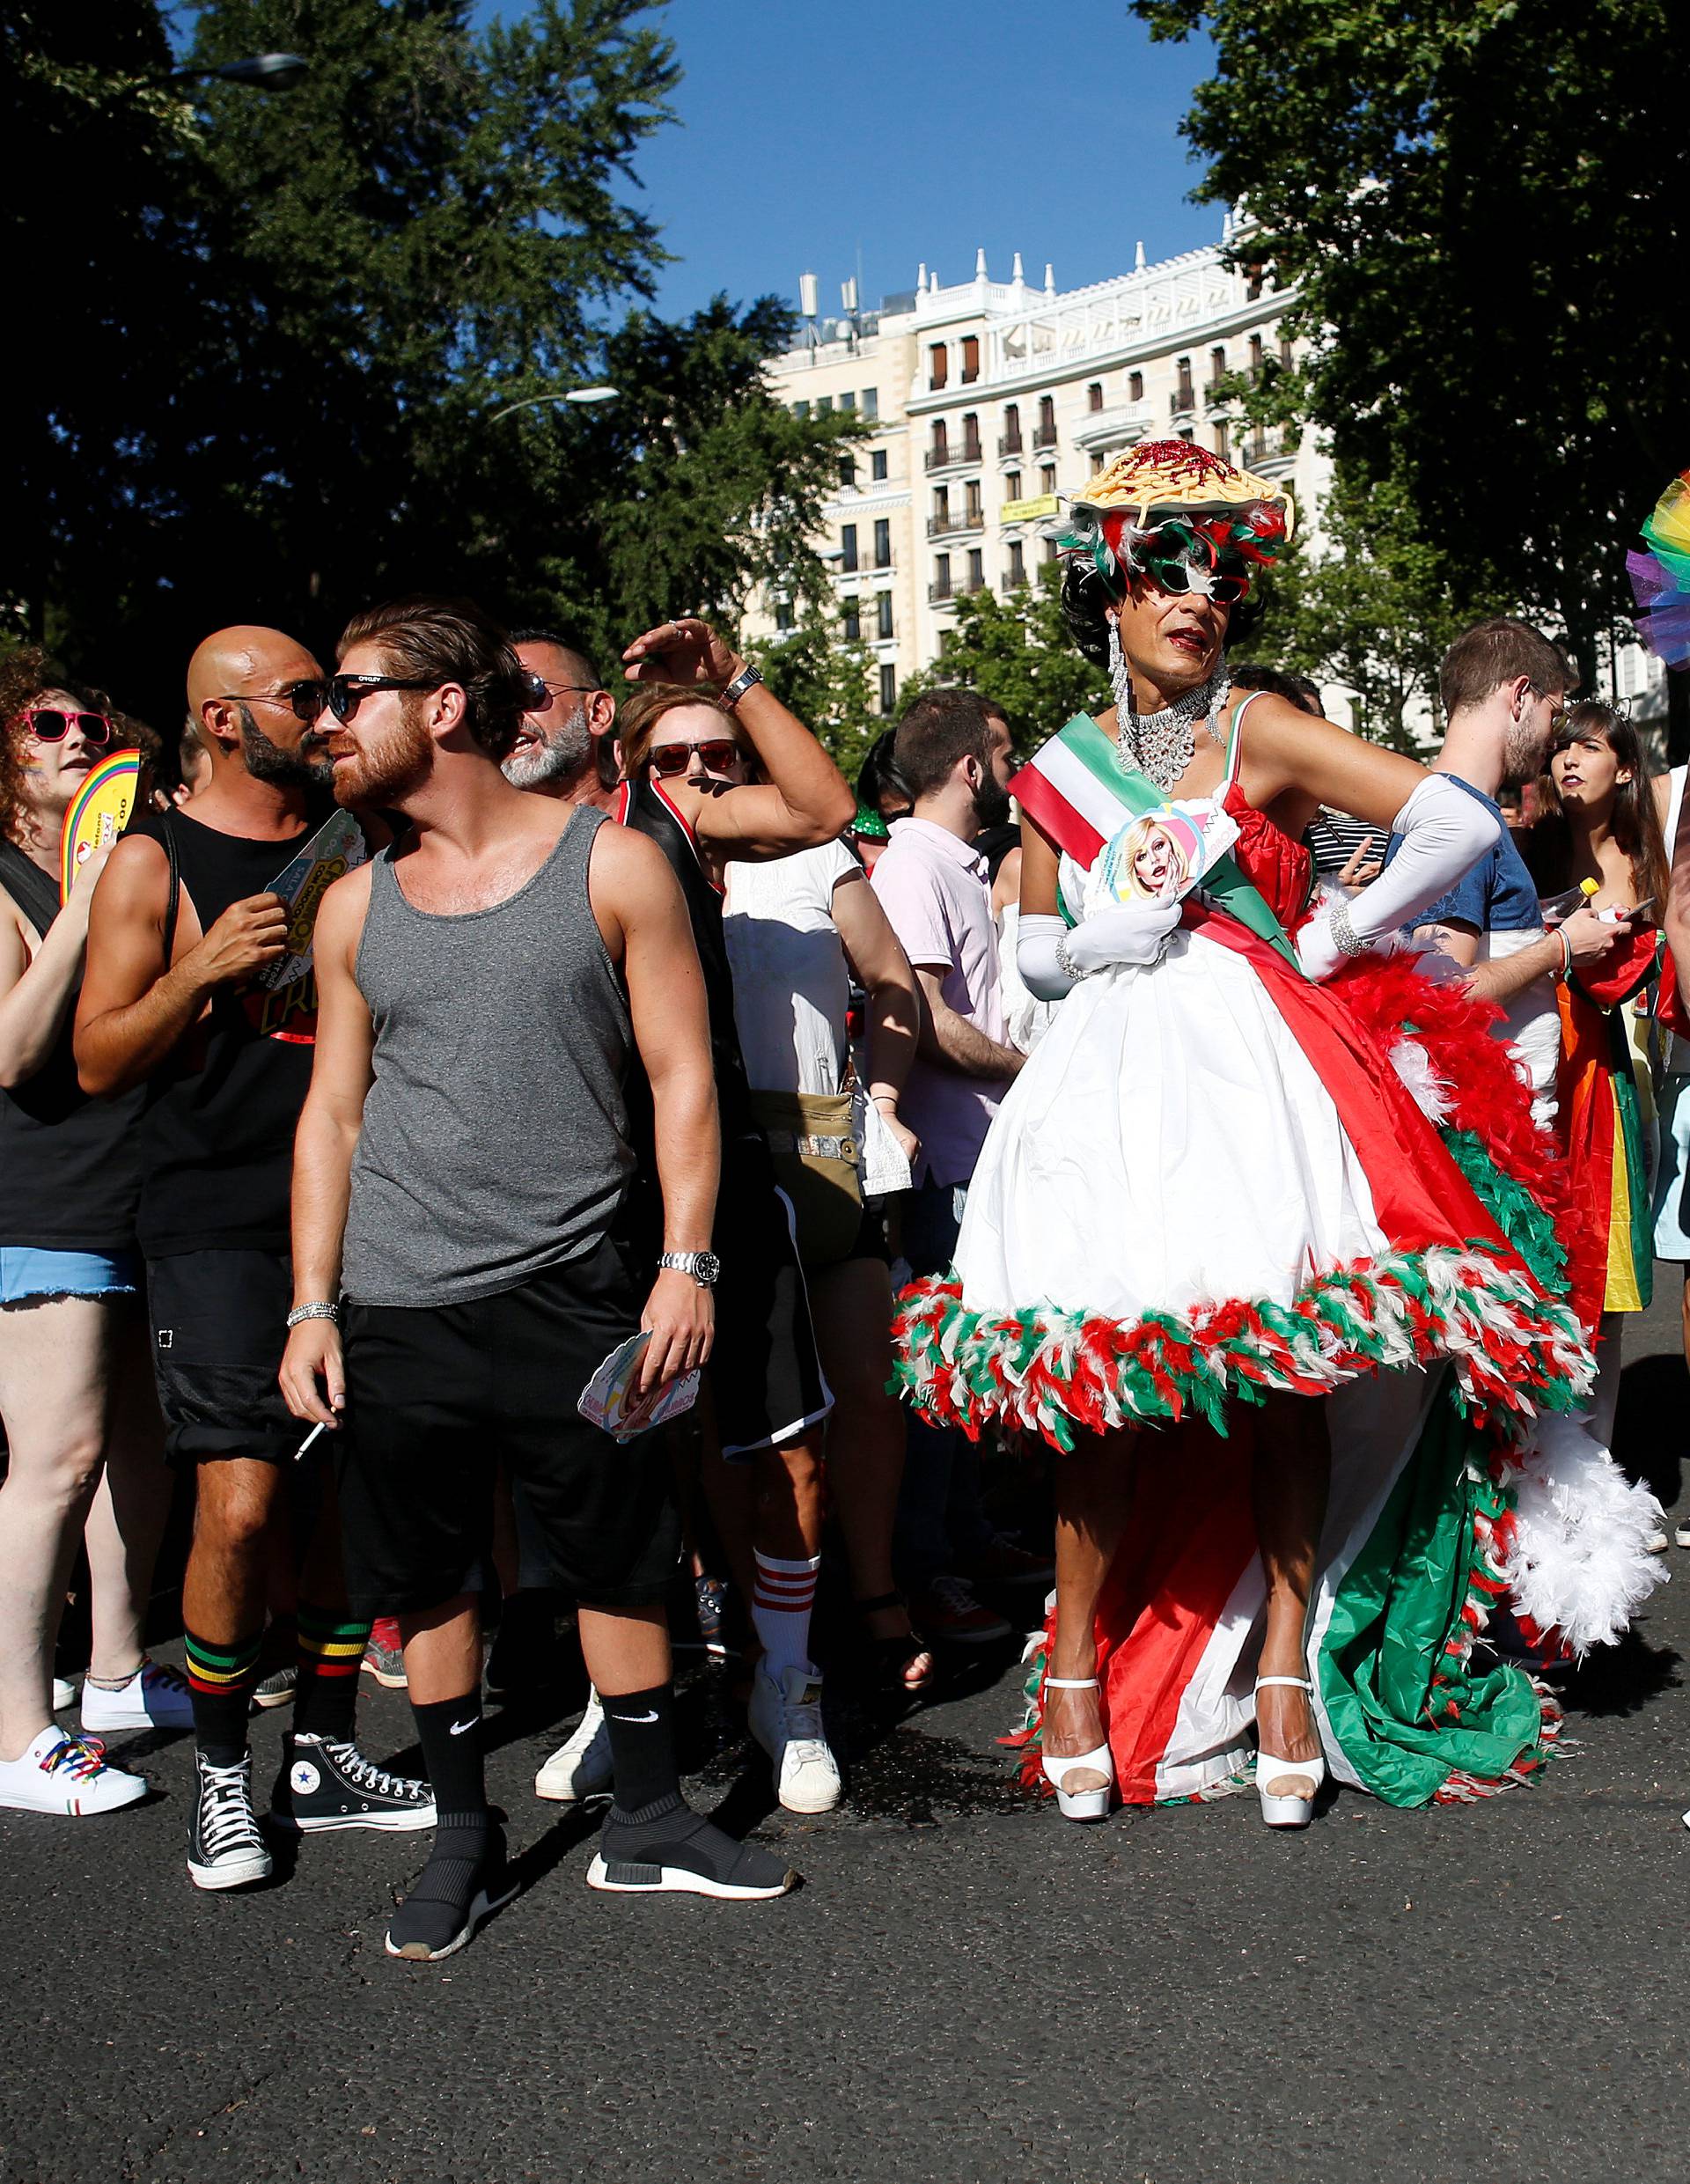 Revellers attend the World Pride parade in Madrid